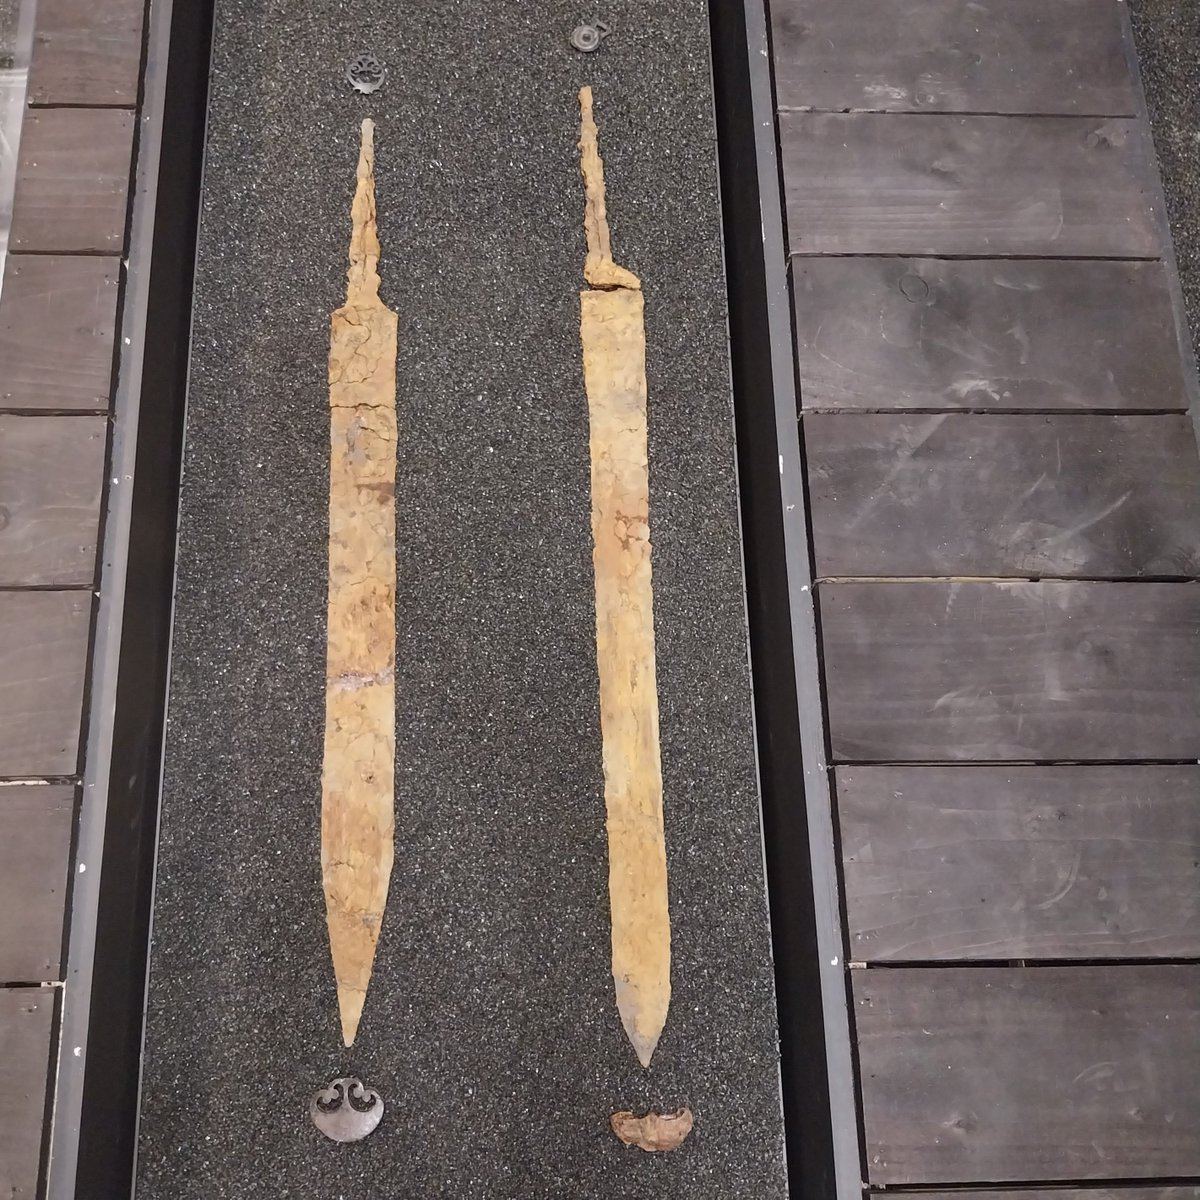 👀A sneak peak into the @britishmuseum Legion exhibition Here's the much talked about Double Sword Burial from Canterbury. Curators loaned and reconstructed this unique burial, believed to be the result of an ancient murder that took place in #Roman #Canterbury! [...]